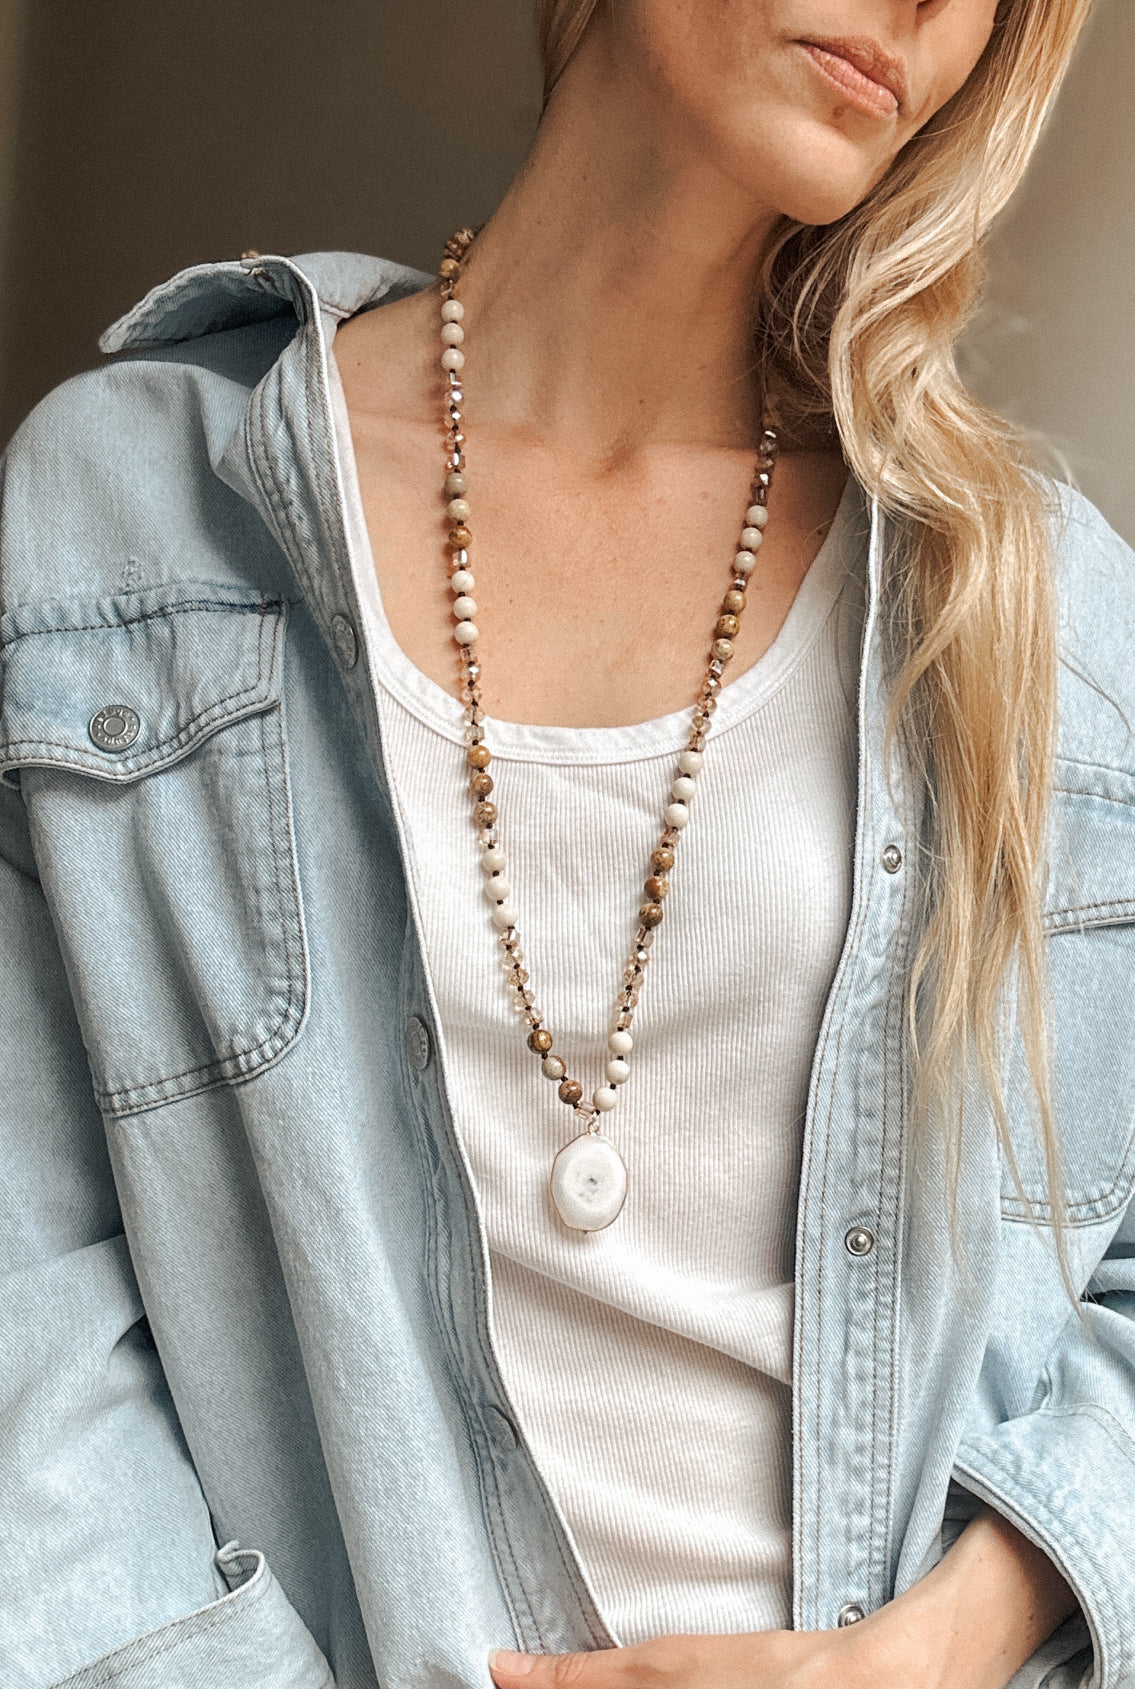 The Ellery Necklace